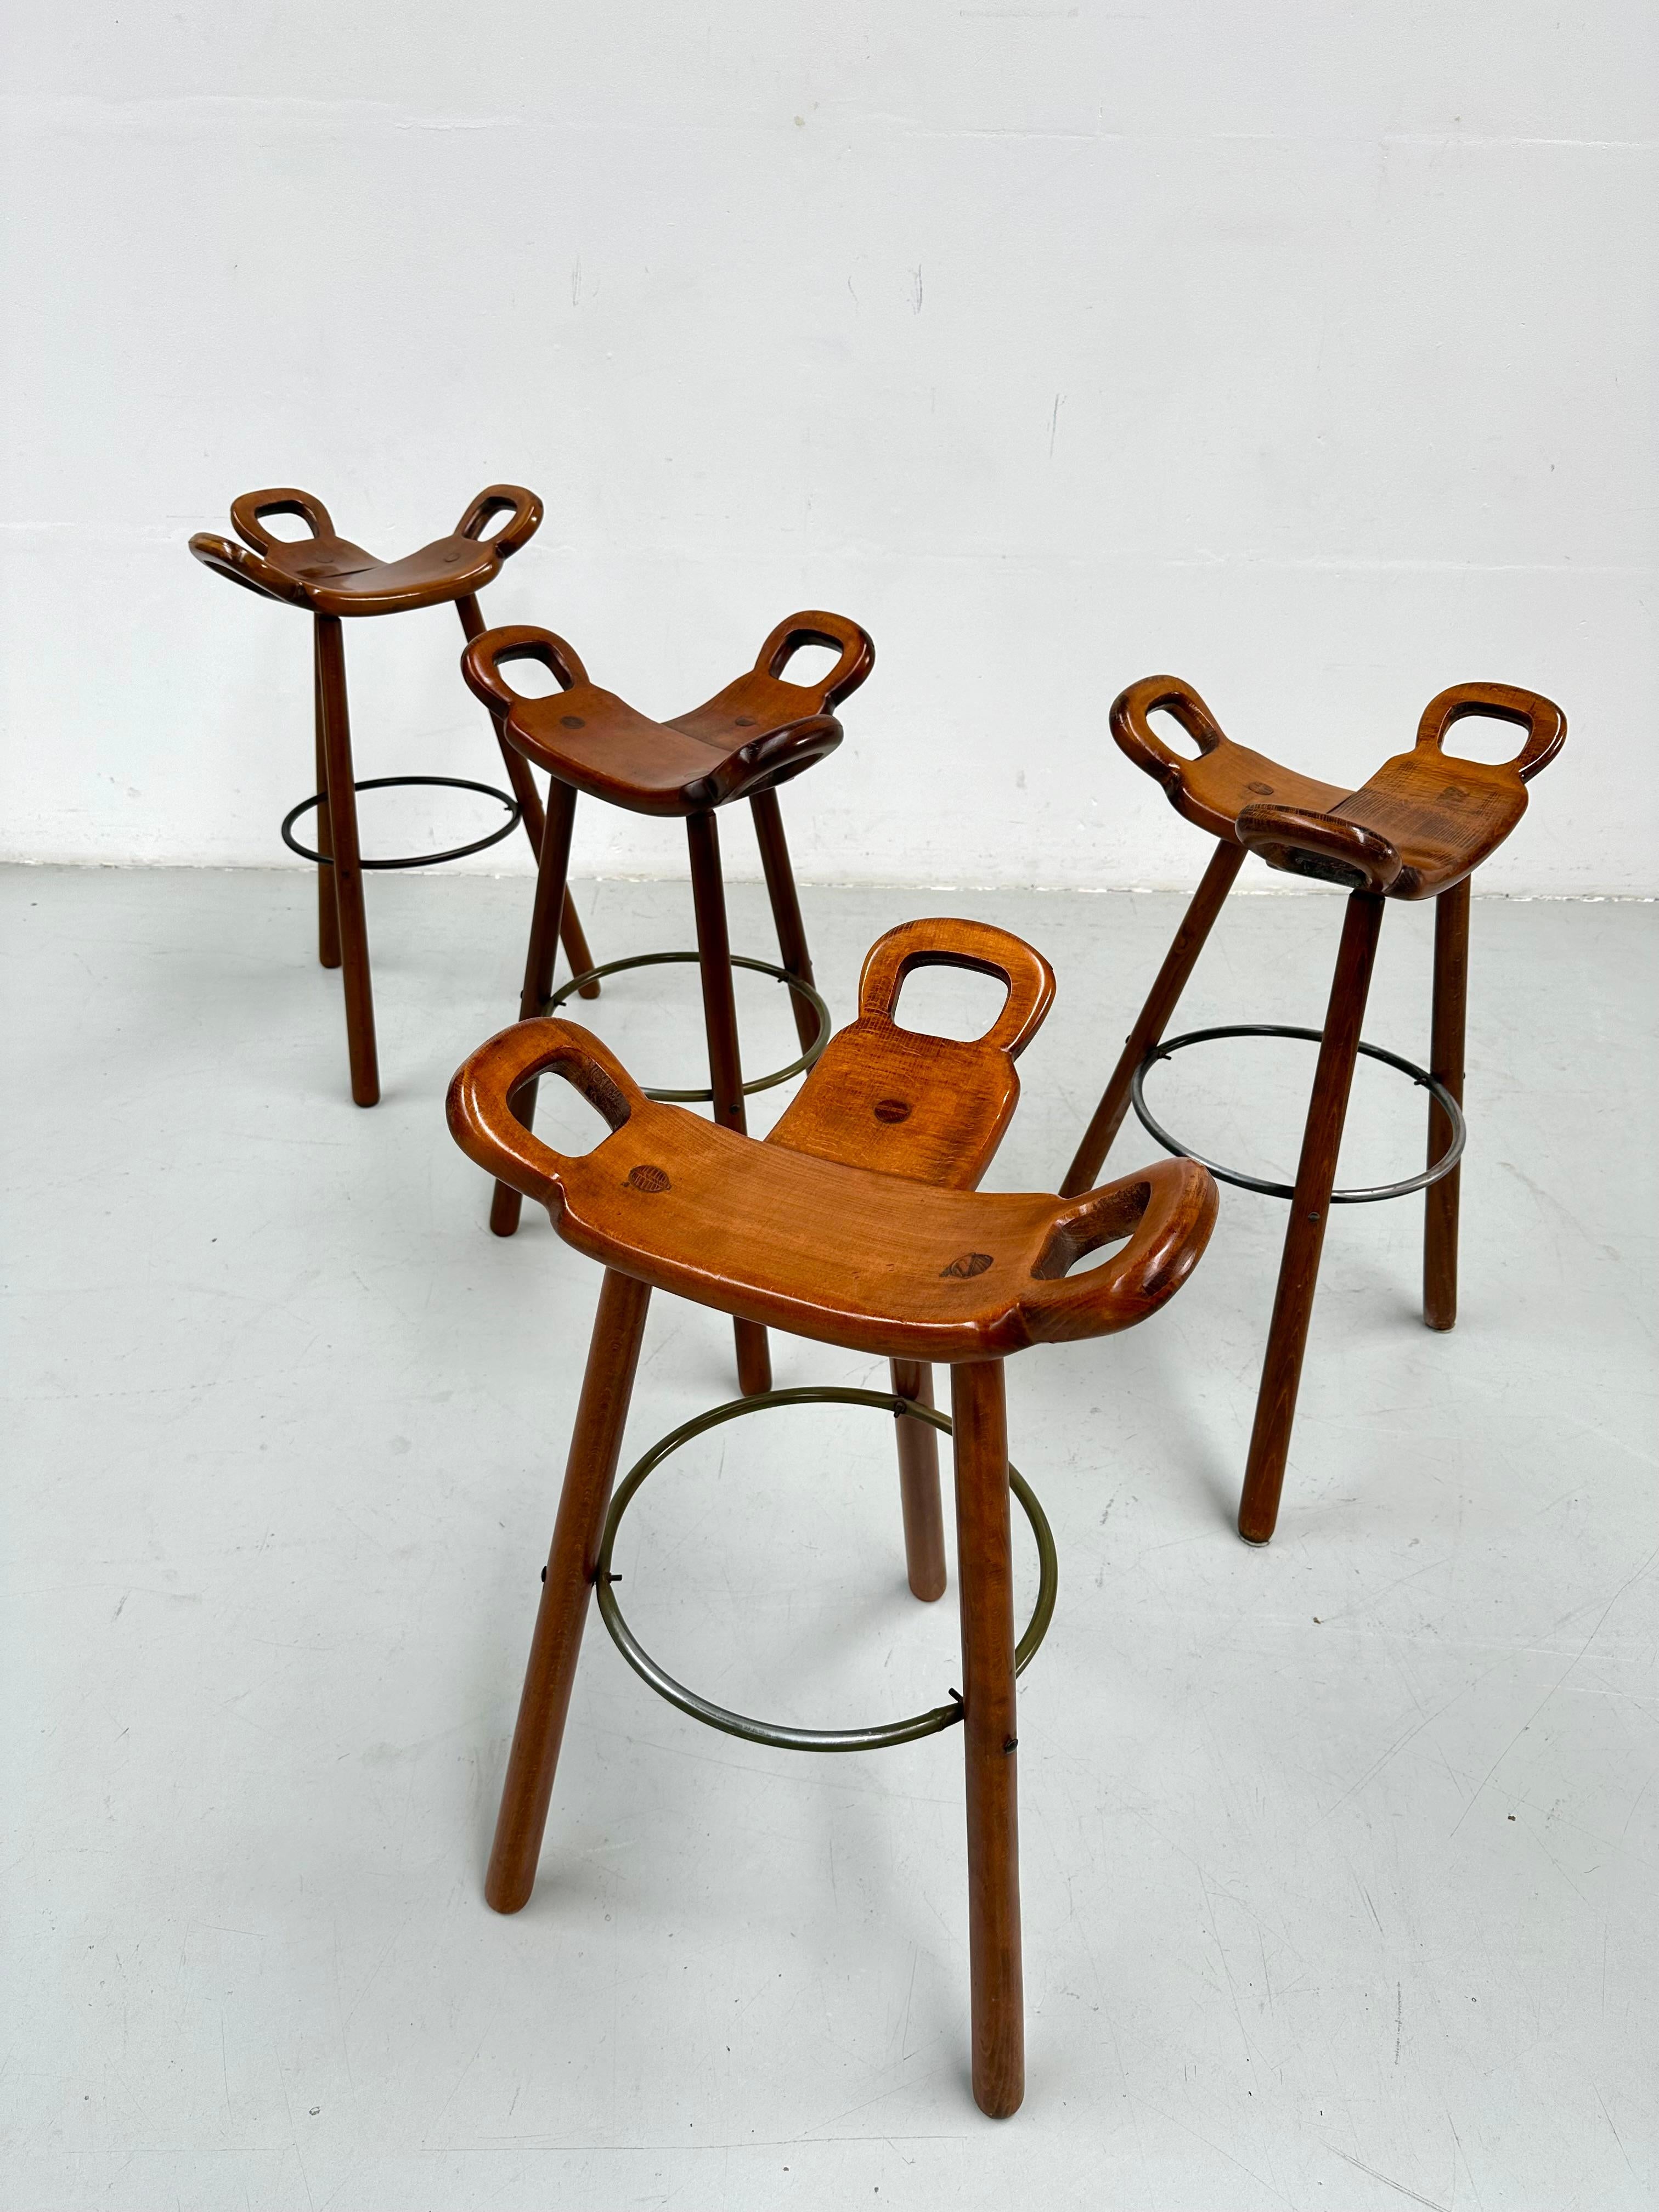 Metal Set of 4 Marbella Brutalist Stools by Sergio Rodrigues for Confonorm 1970s. For Sale